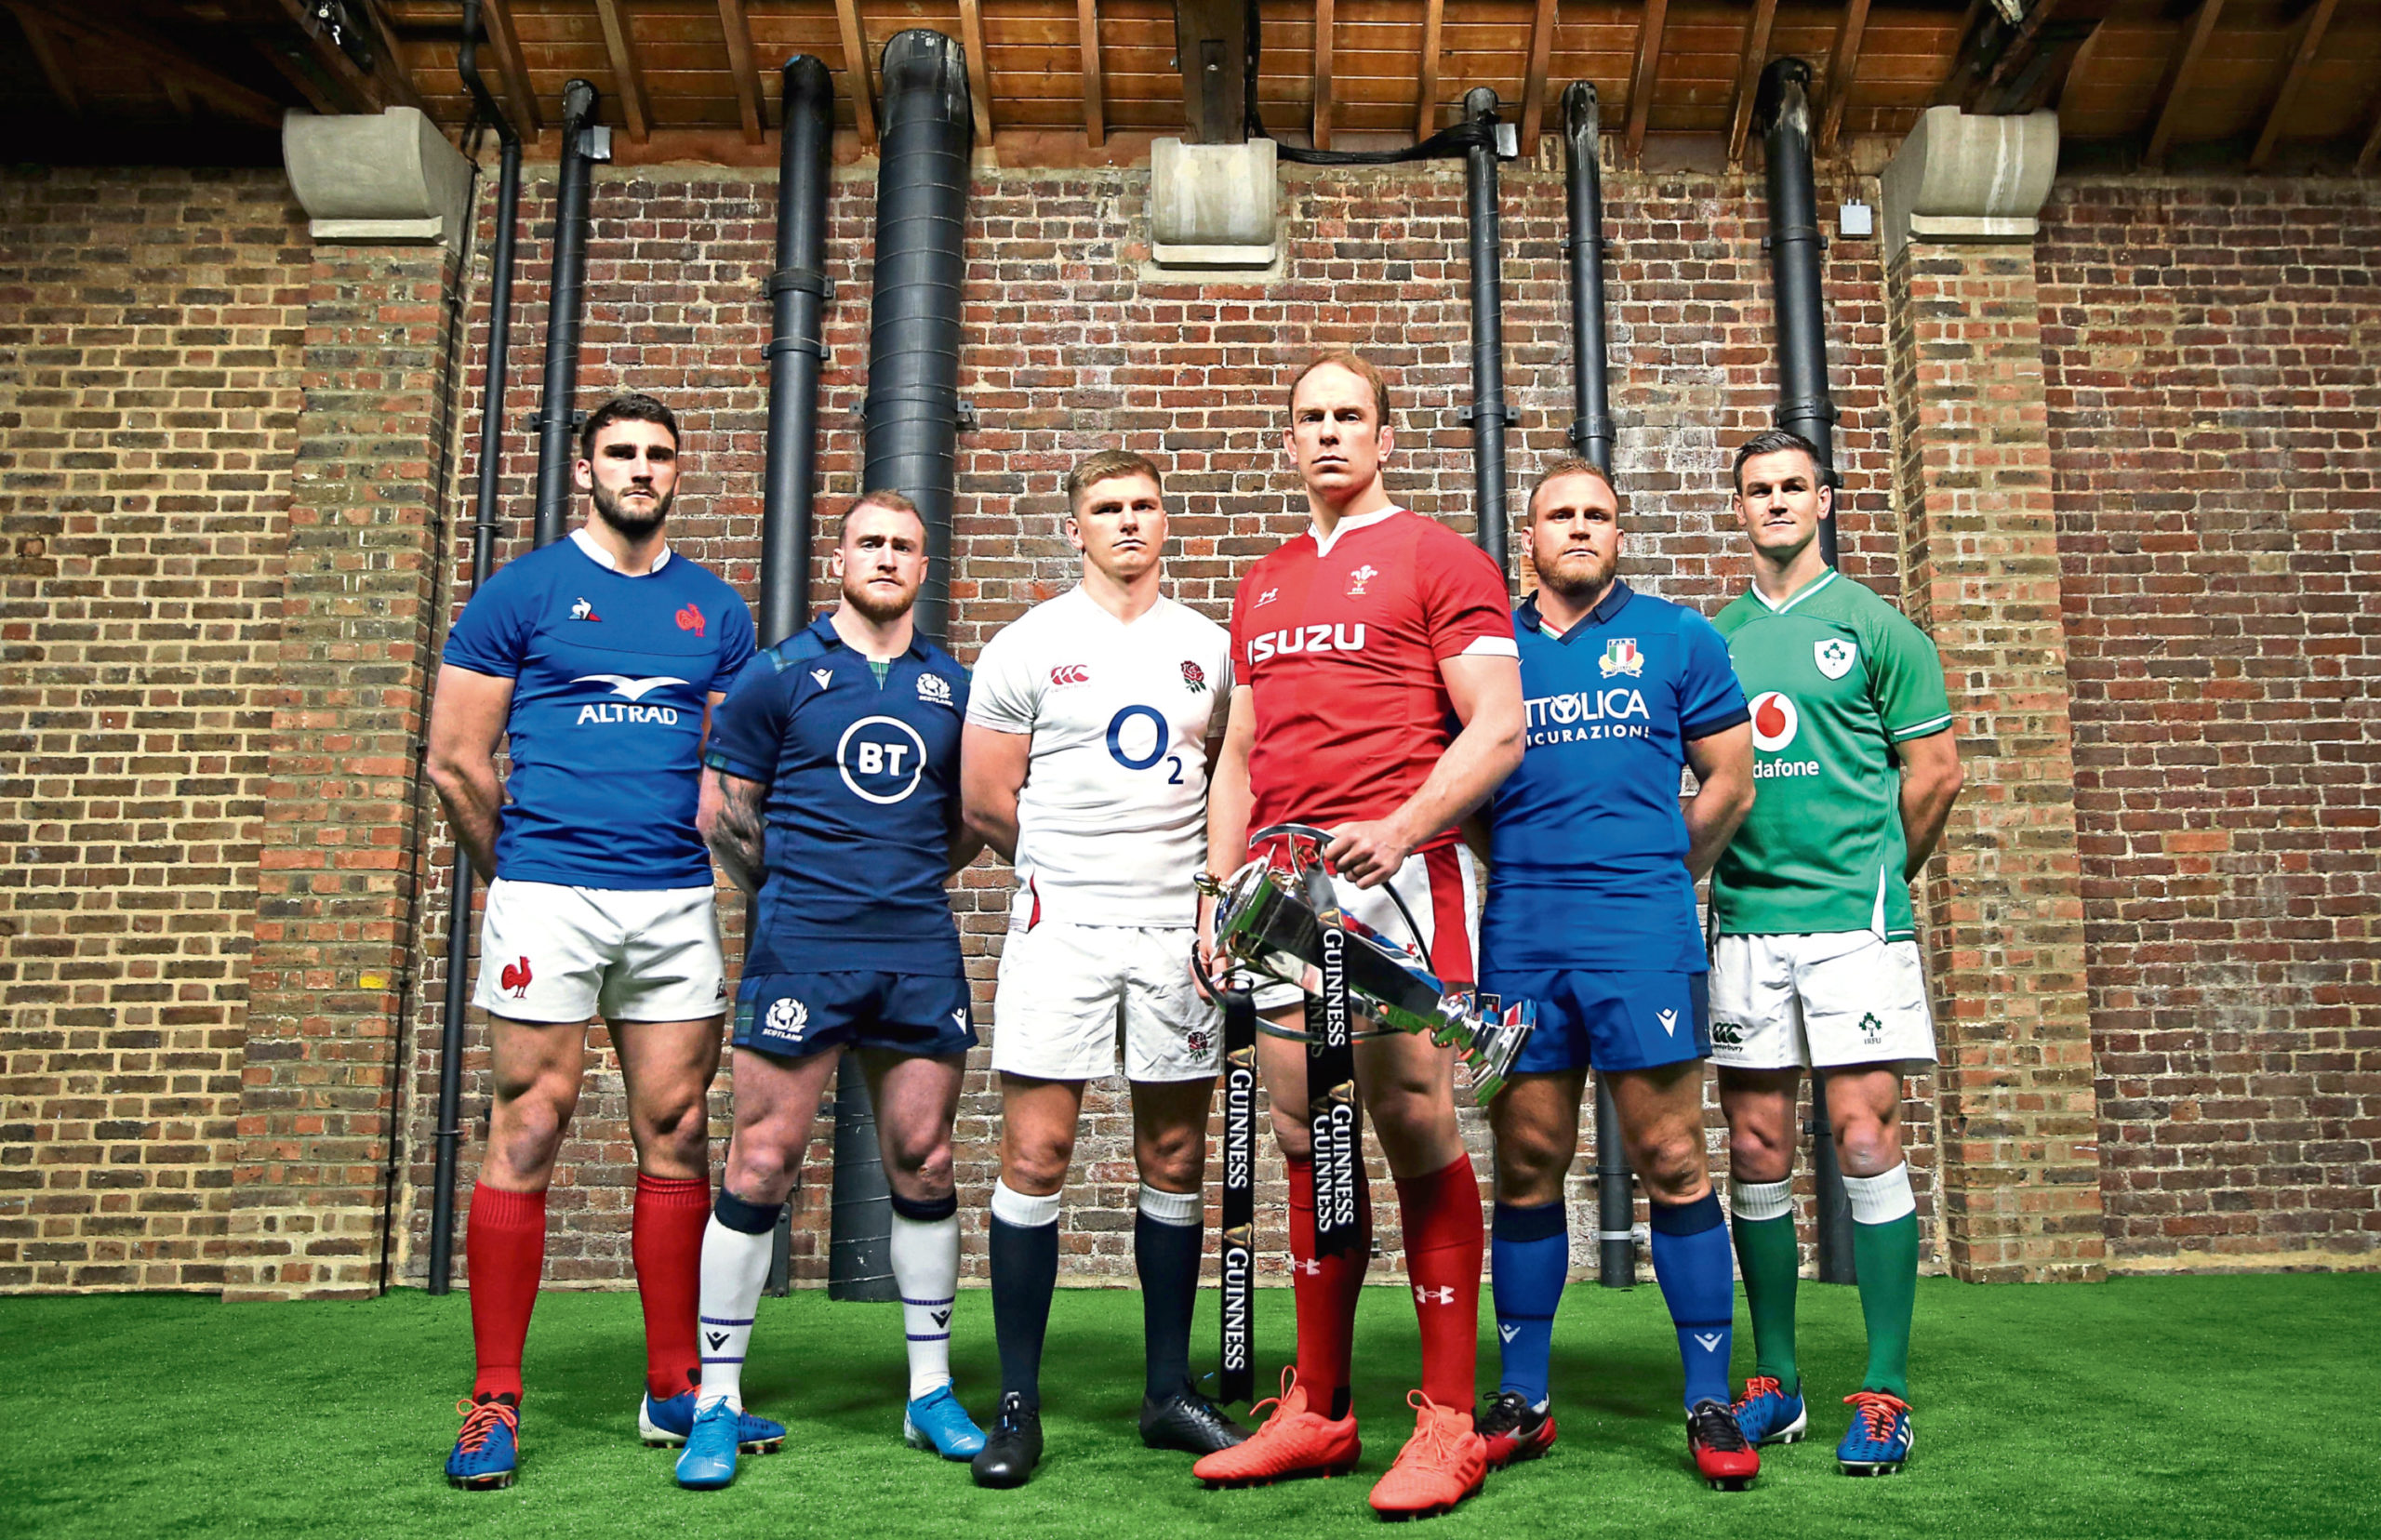 Team captains pose for a photo with the Six Nations Trophy (left to right) France's Charles Ollivon, Scotland's Stuart Hogg, England's Owen Farrell,  Wales' Alun Wyn Jones, Italy's Luca Bigi and Ireland's Jonathan Sexton during the Guinness Six Nations launch at Tobacco Dock, London. PA Photo. Picture date: Wednesday January 22, 2020. See PA story RUGBYU Six Nations. Photo credit should read: Steven Paston/PA Wire. RESTRICTIONS: Editorial use only. No commercial use.